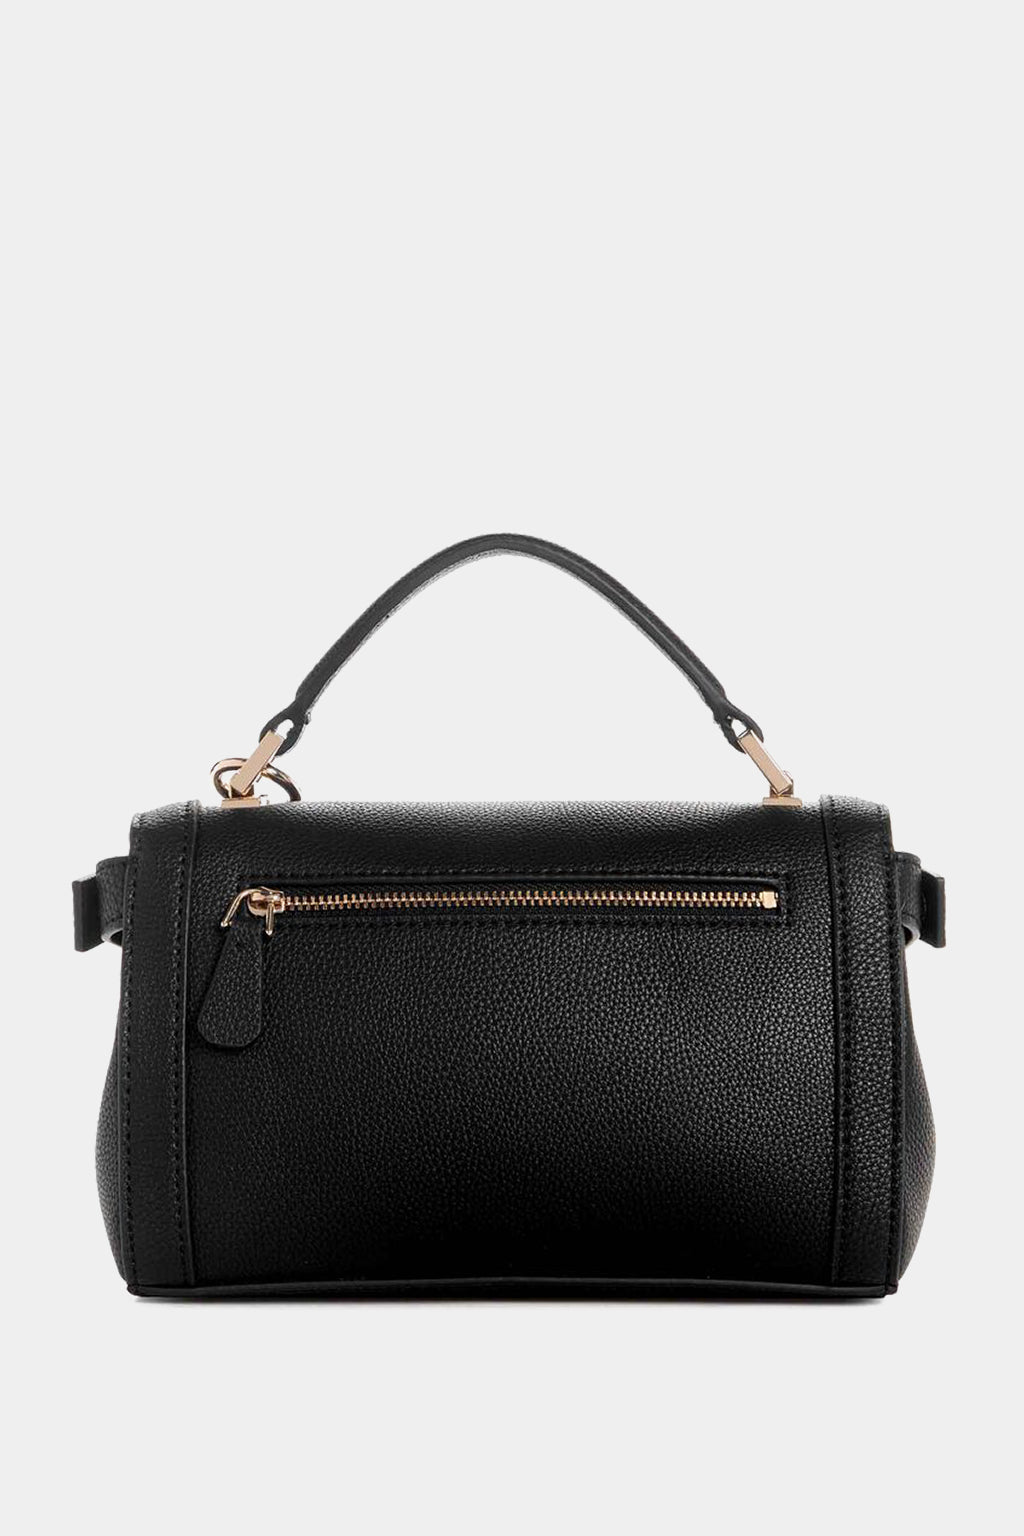 Guess - Angy Top Handle Flap